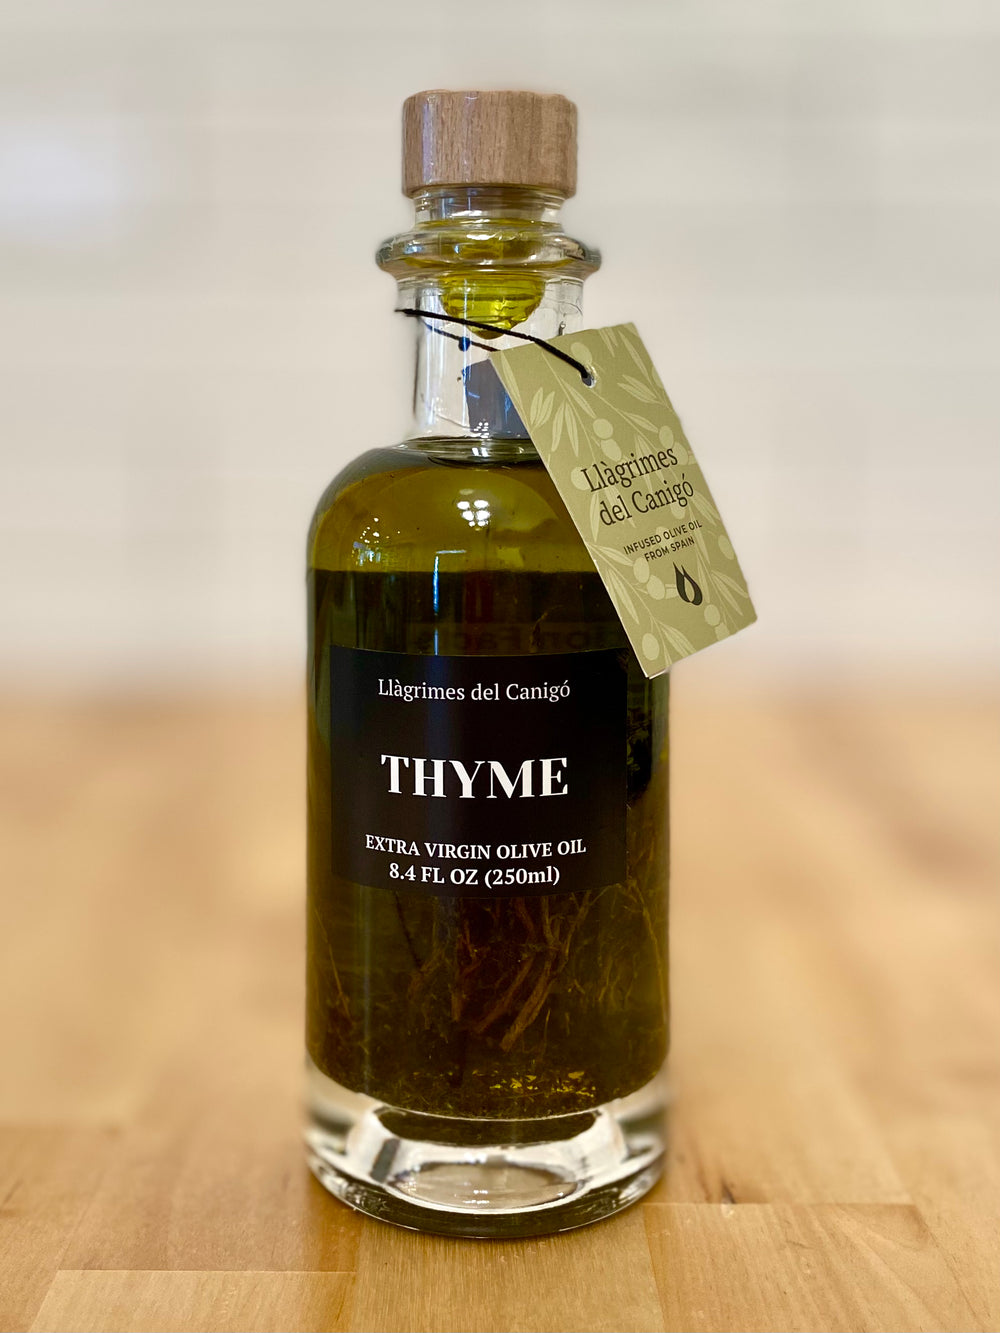 LLÀGRIMES DEL CANIGÓ - Infused Extra Virgin Olive Oil - Thyme